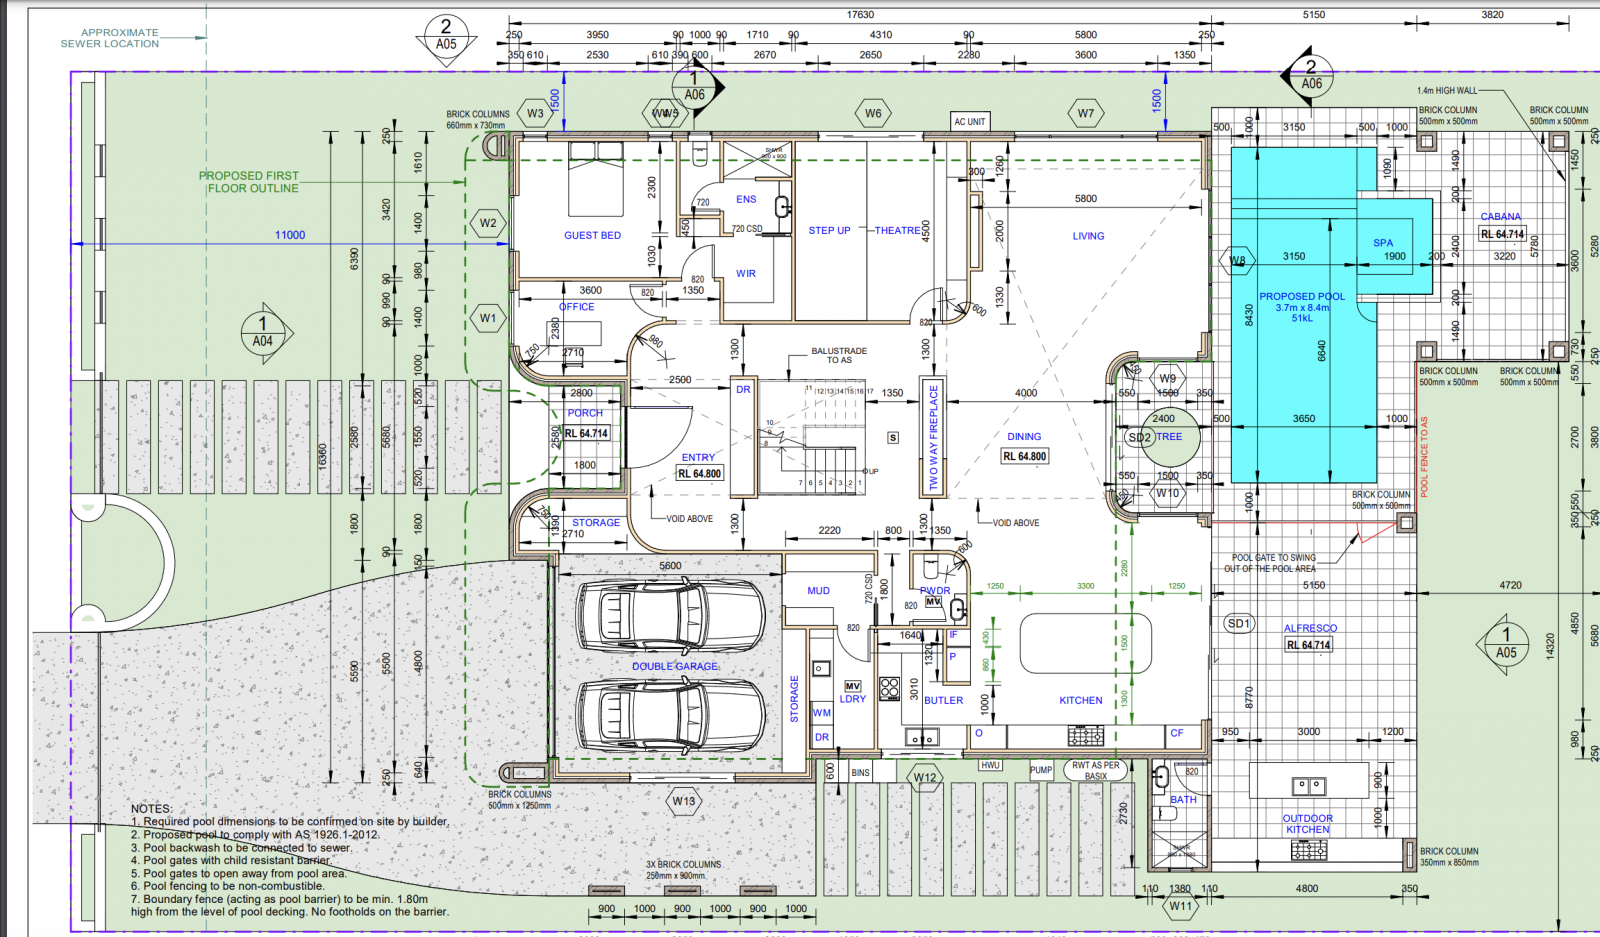 View: Revised ground floor layout